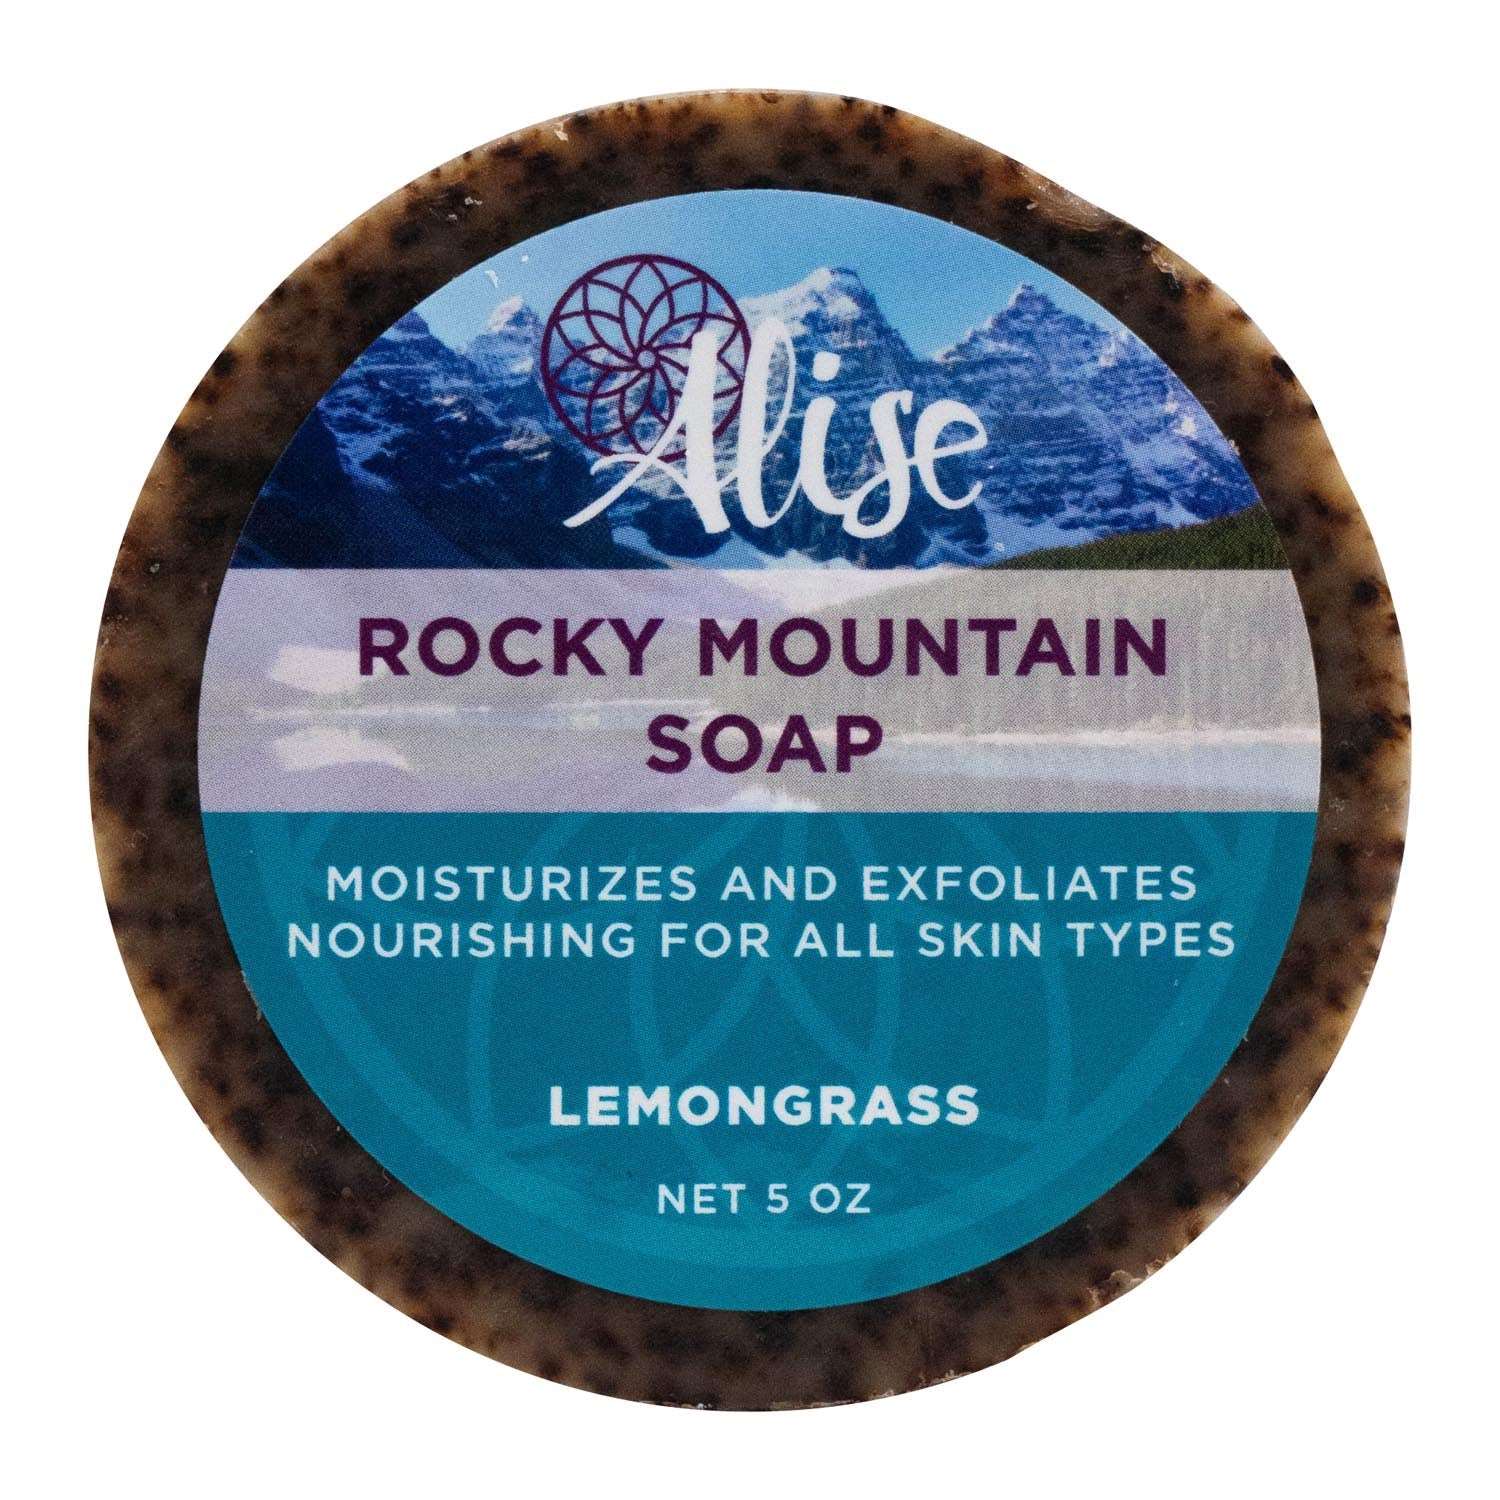 Rocky Mountain Soap 5oz handcrafted by Alise Body Care